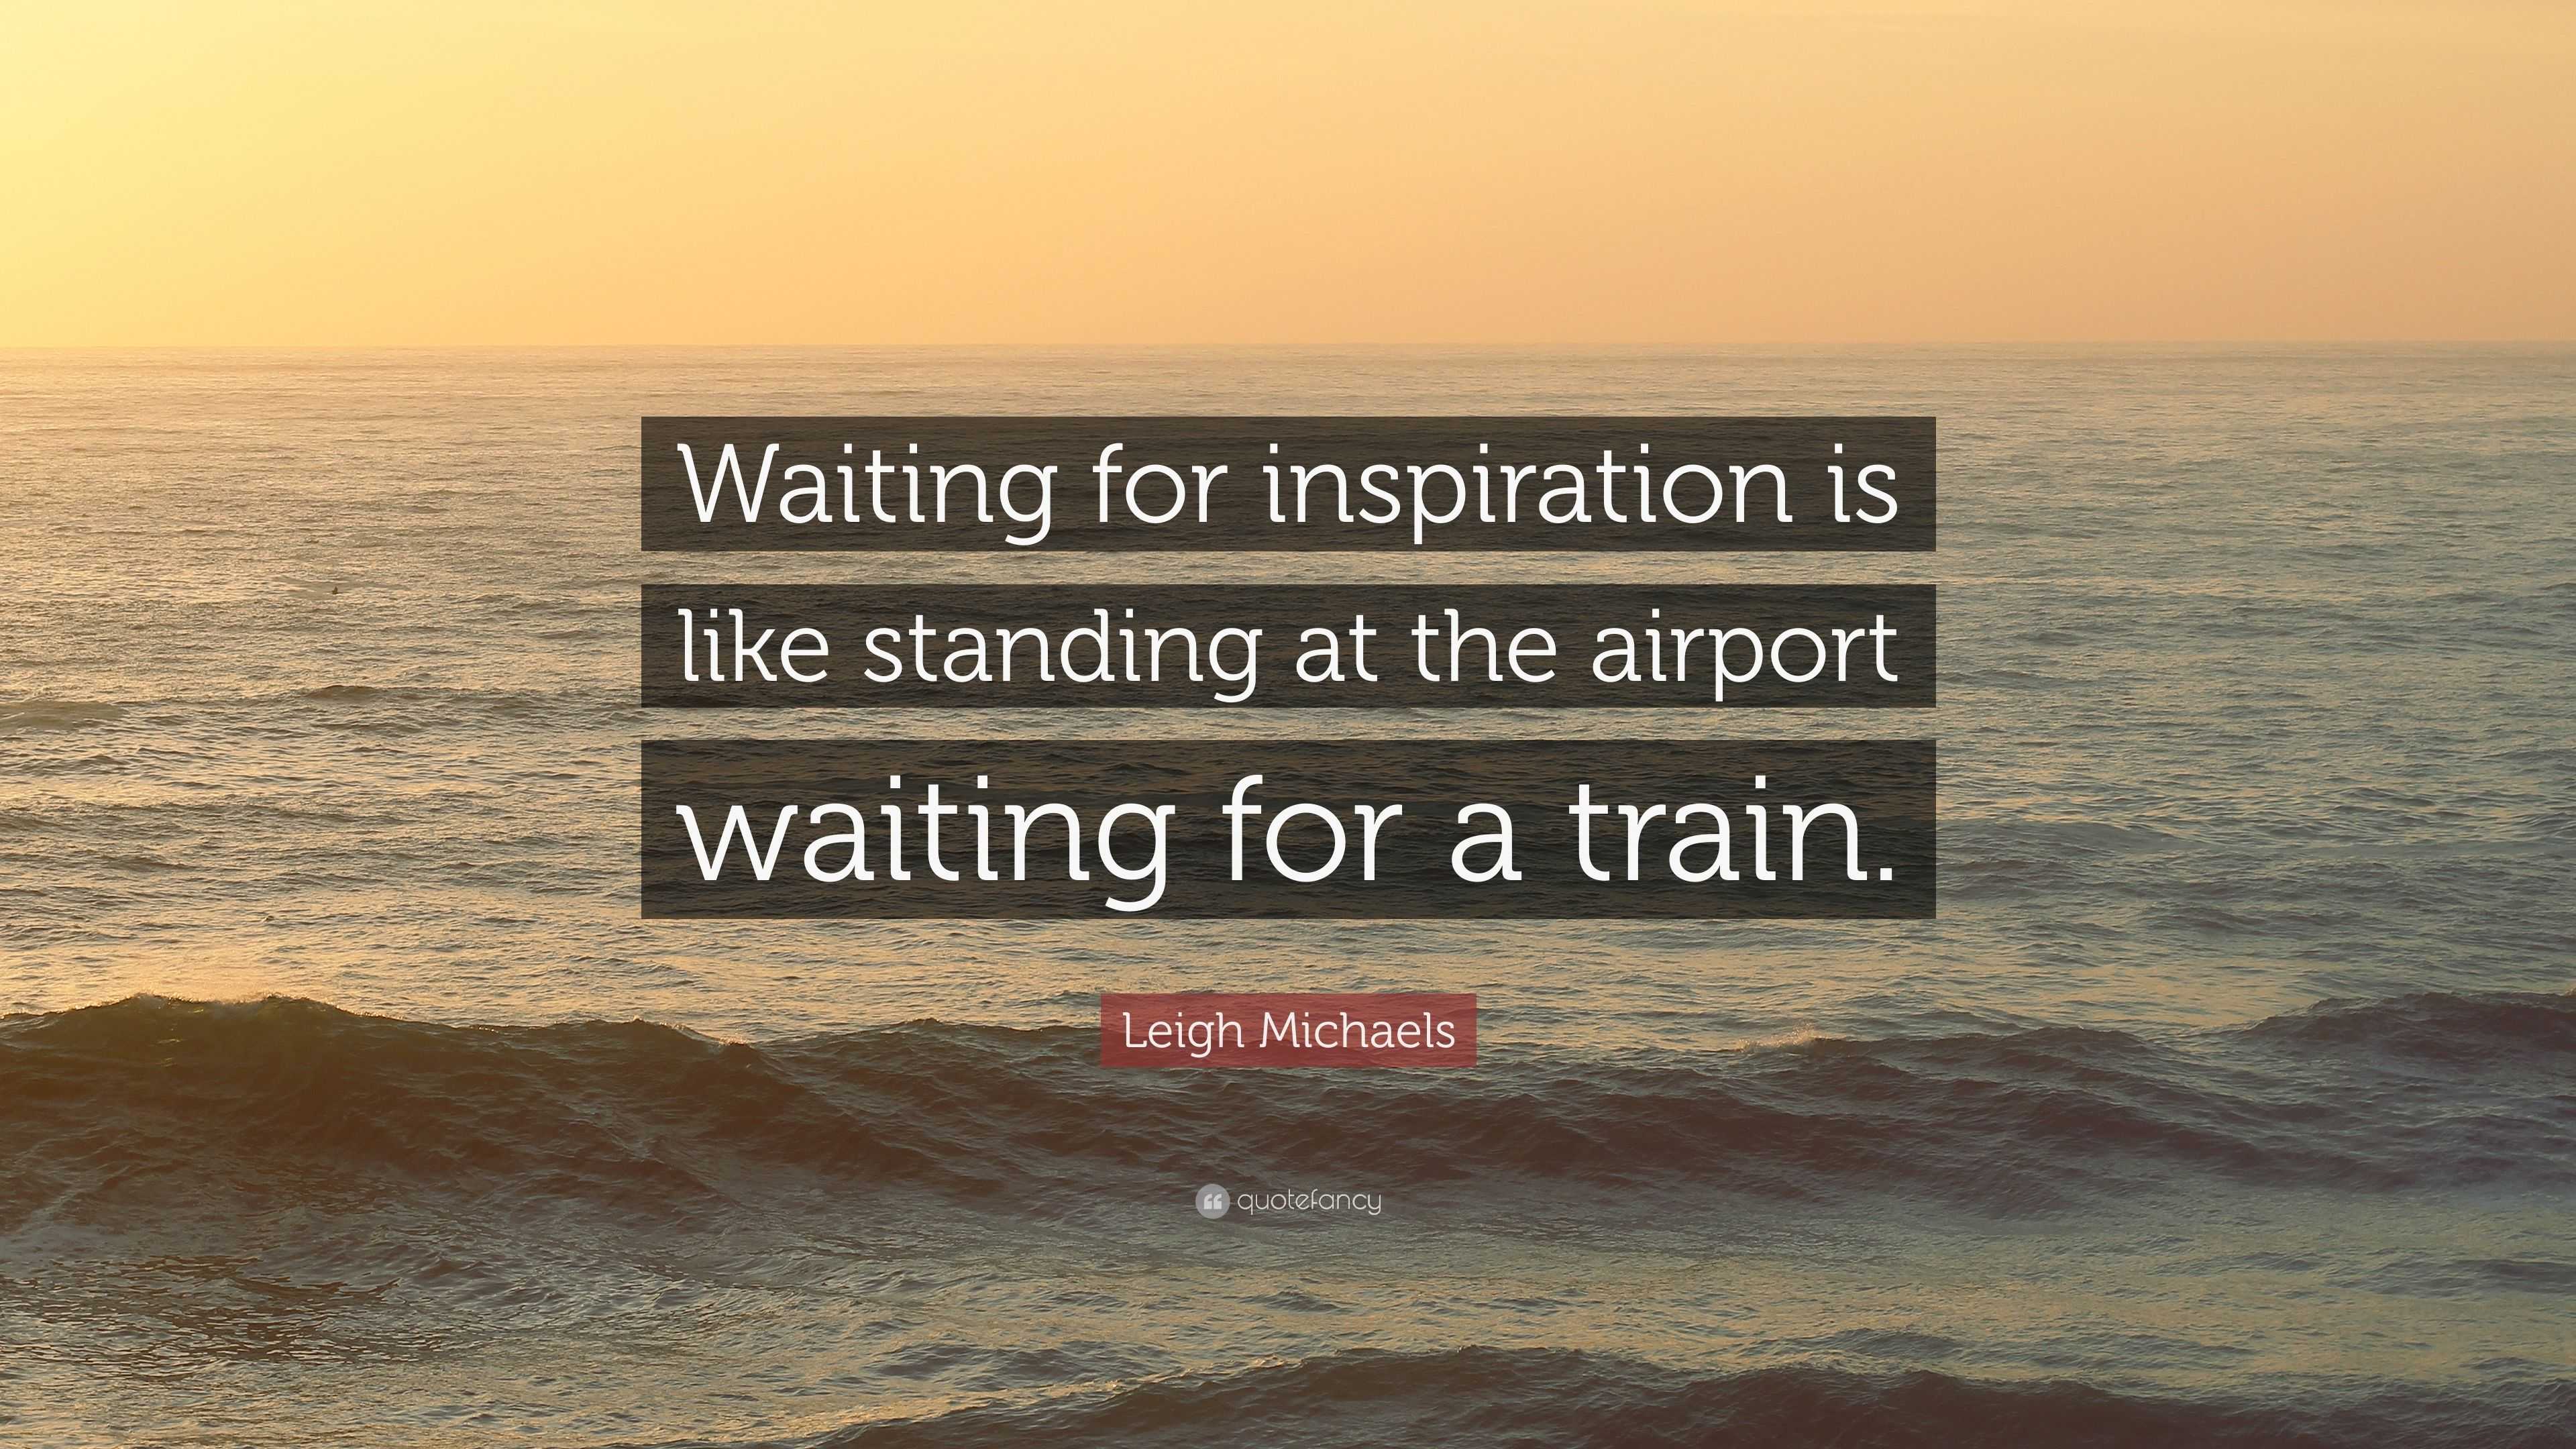 Leigh Michaels Quote: “Waiting for inspiration is like standing at the